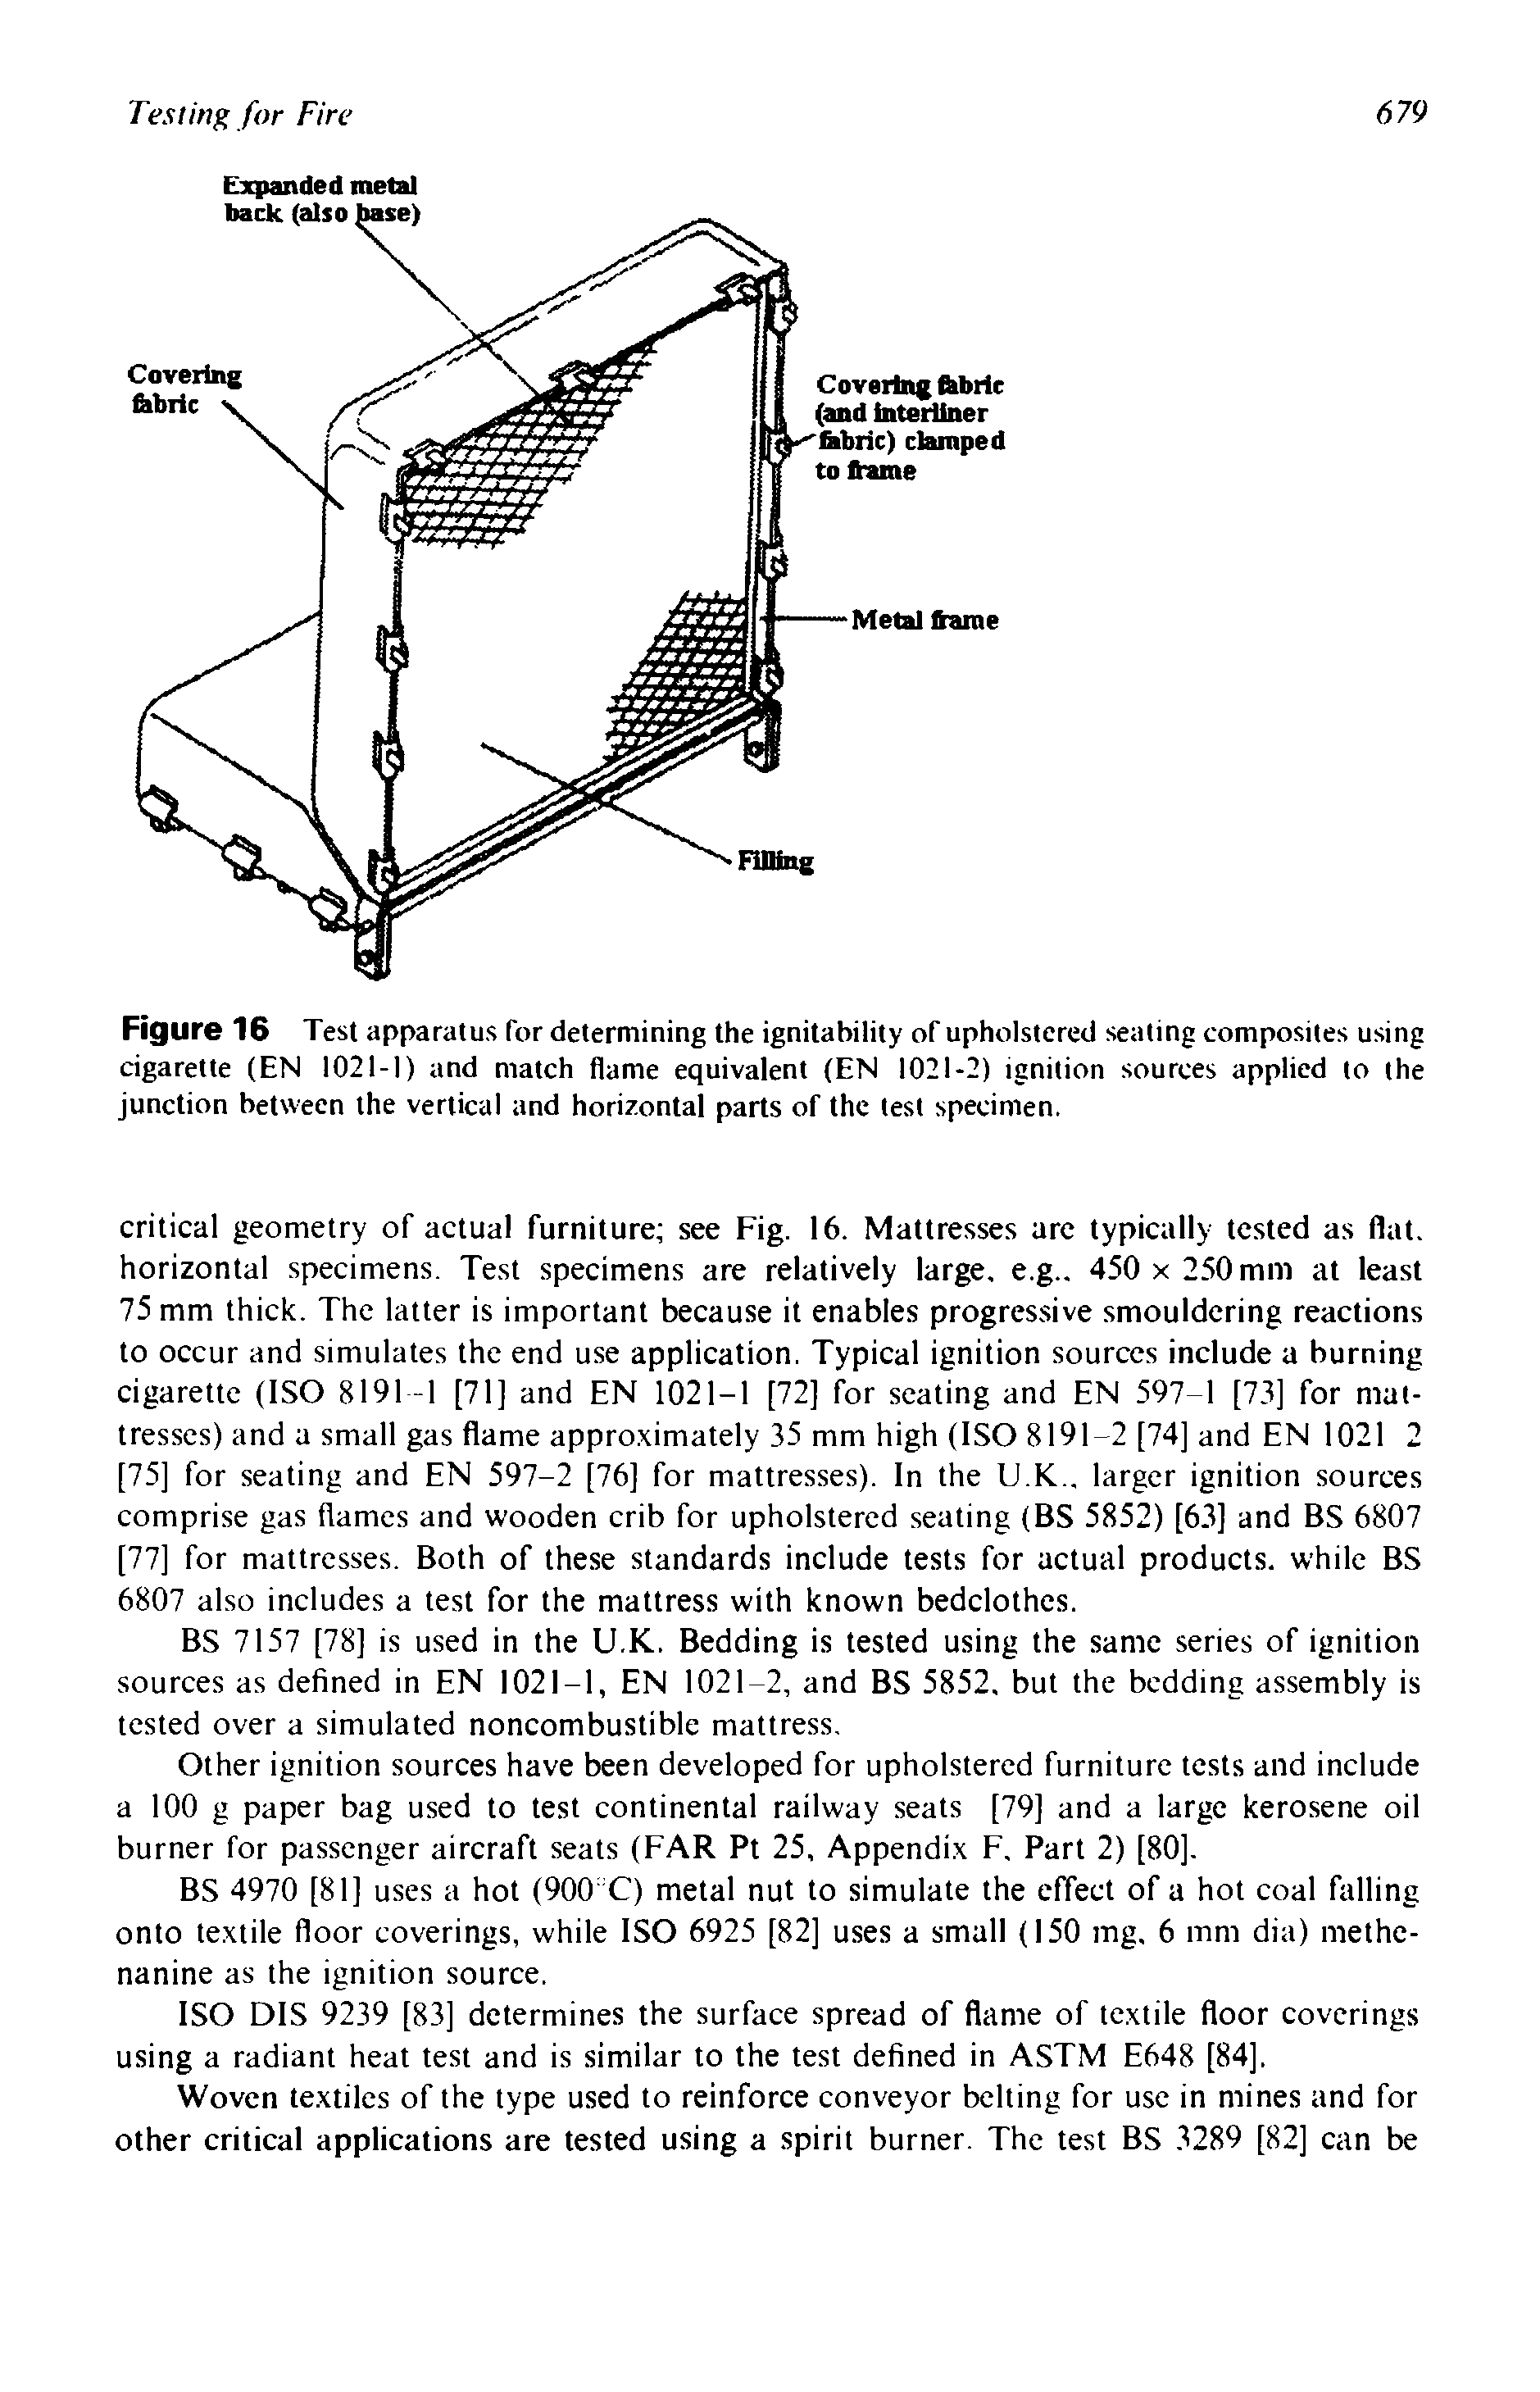 Figure 16 Test apparatus for determining the ignitability of upholstered seating composites using cigarette (EN 1021-1) and match flame equivalent (EN 1021-2) ignition sources applied to the junction between the vertical and horizontal parts of the test specimen.